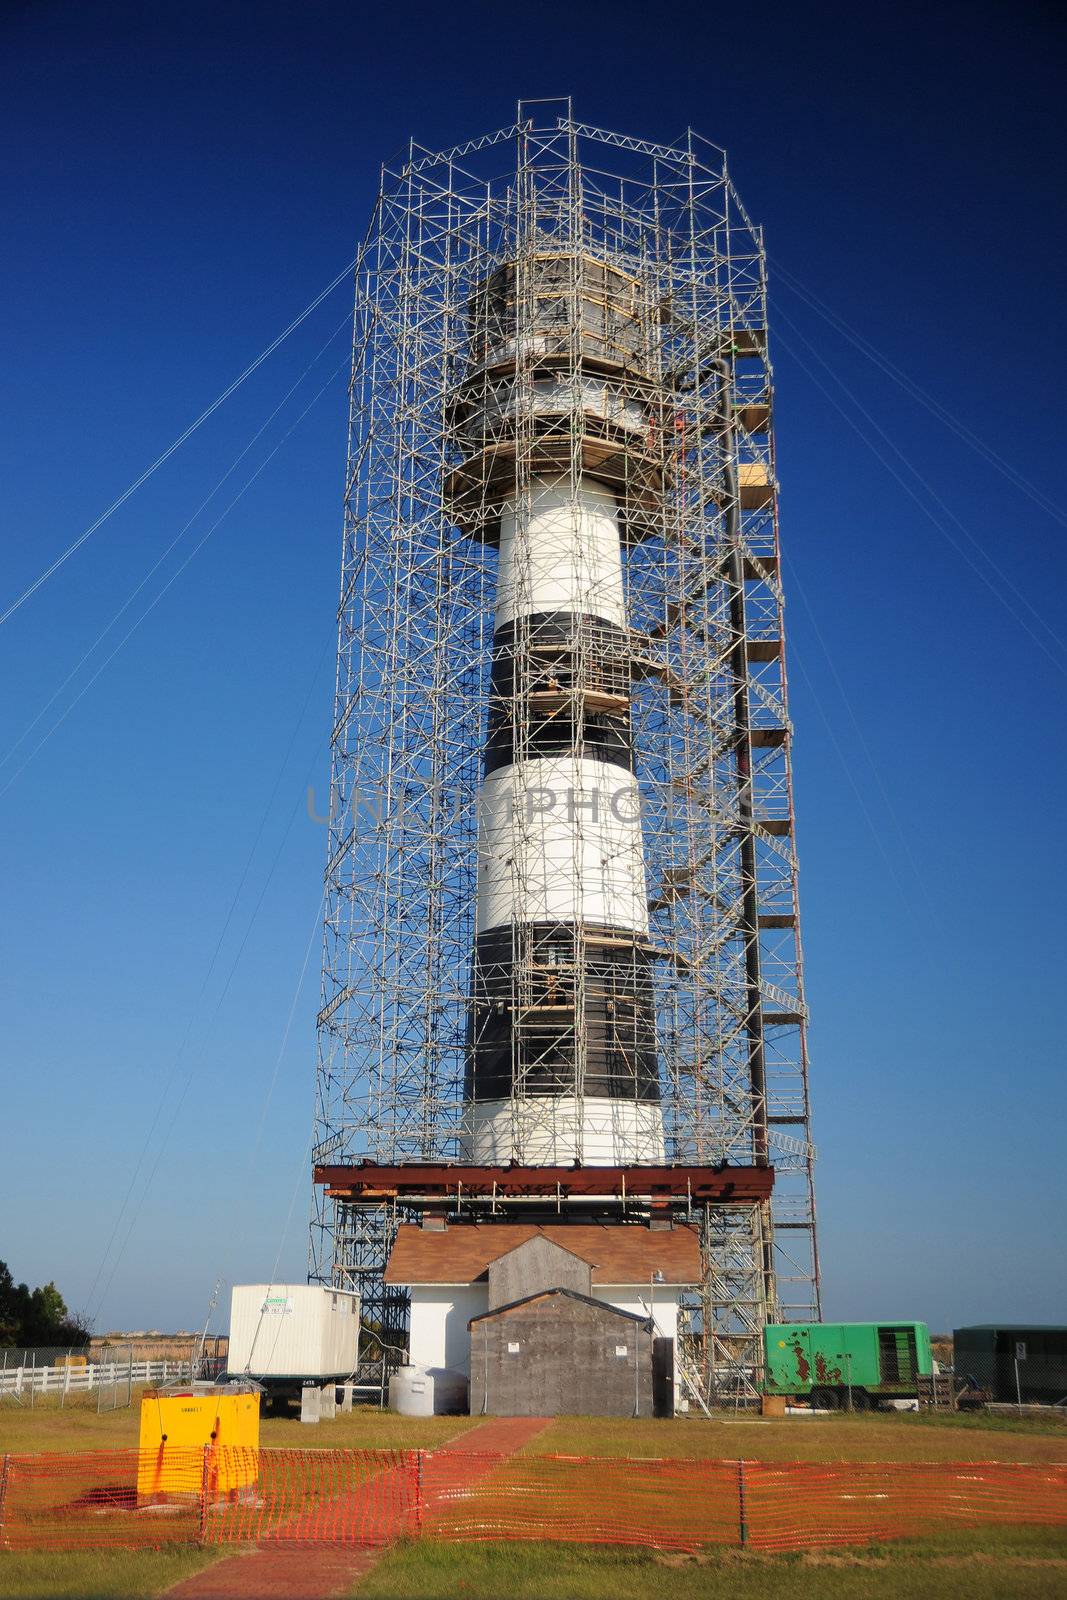 bodie island lighthouse from North Carolina was under construction